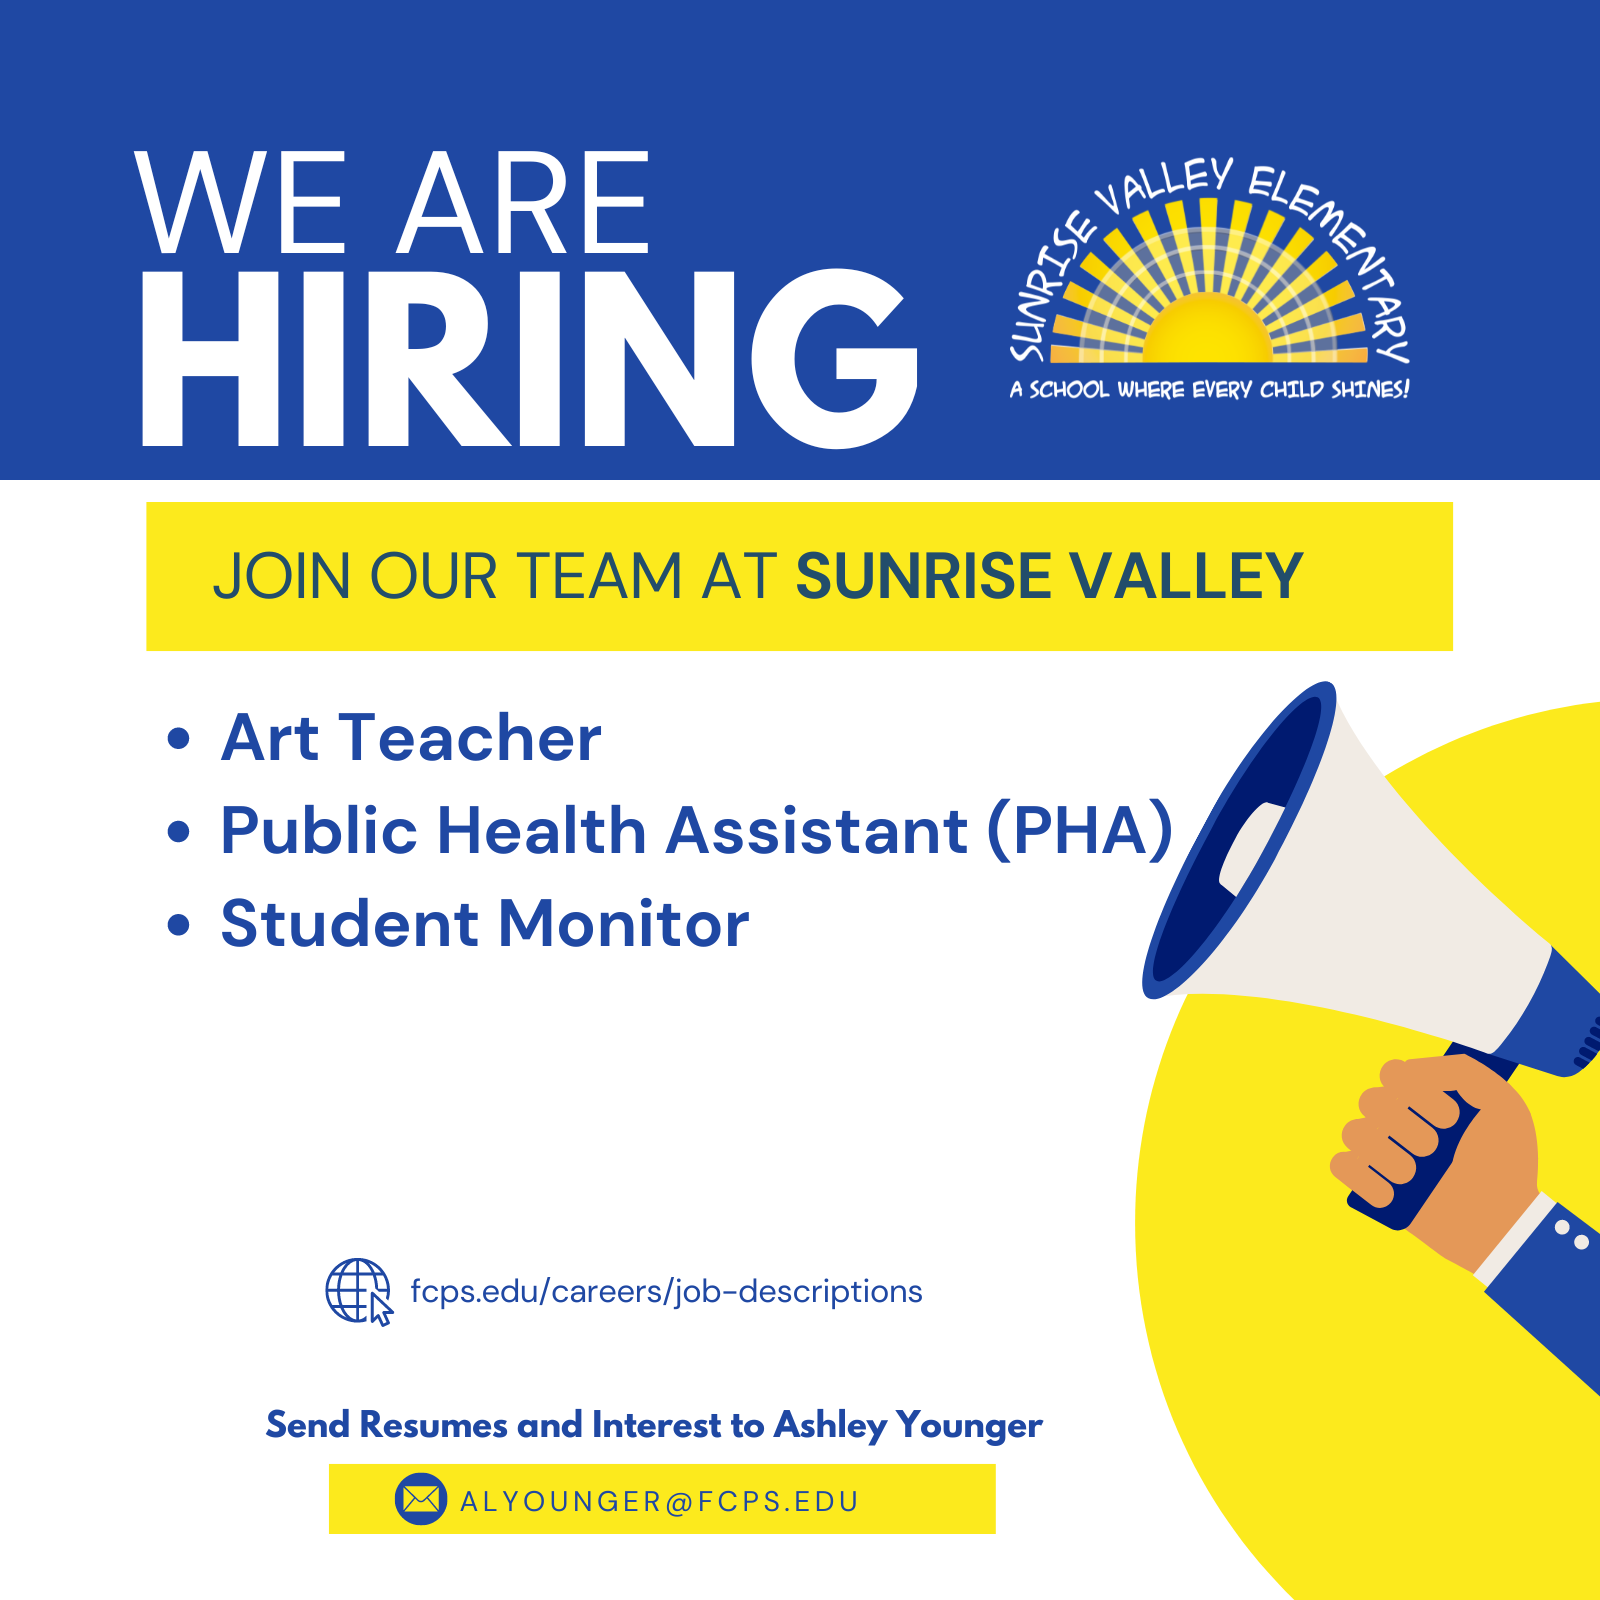 looking to hire an art teacher, Public health assistant (PHA), and student monitor